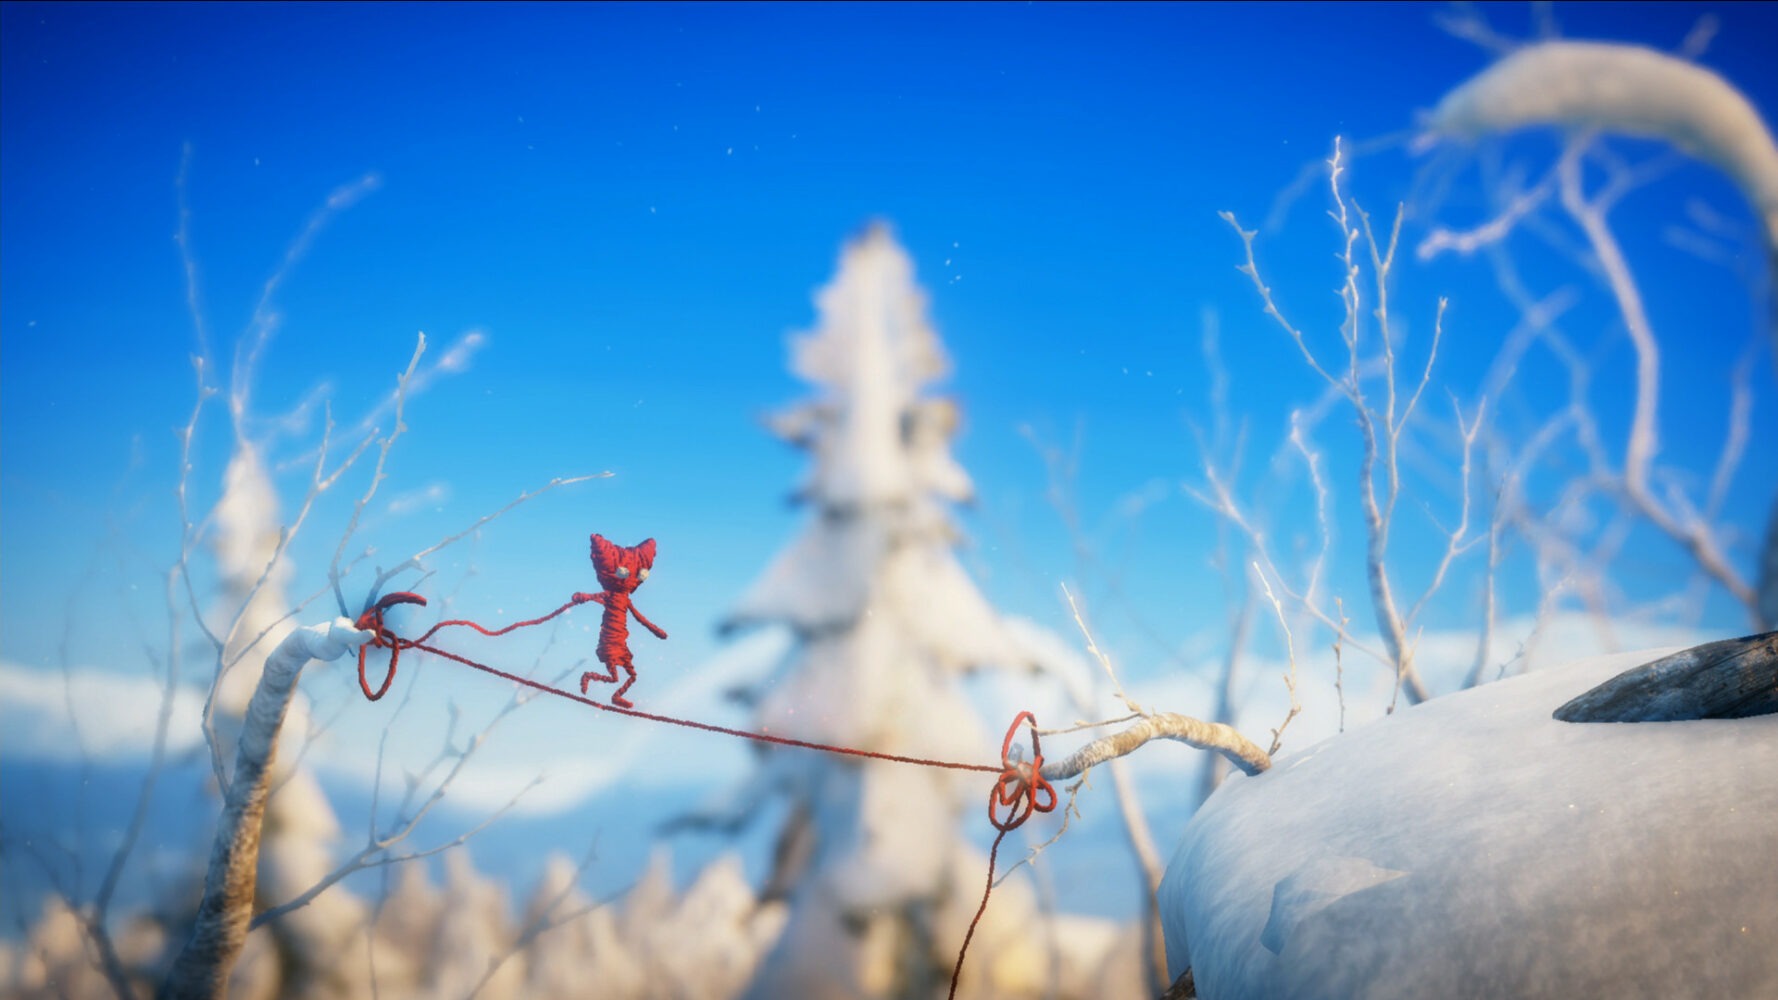 Unravel Review Indie Game Fans Review